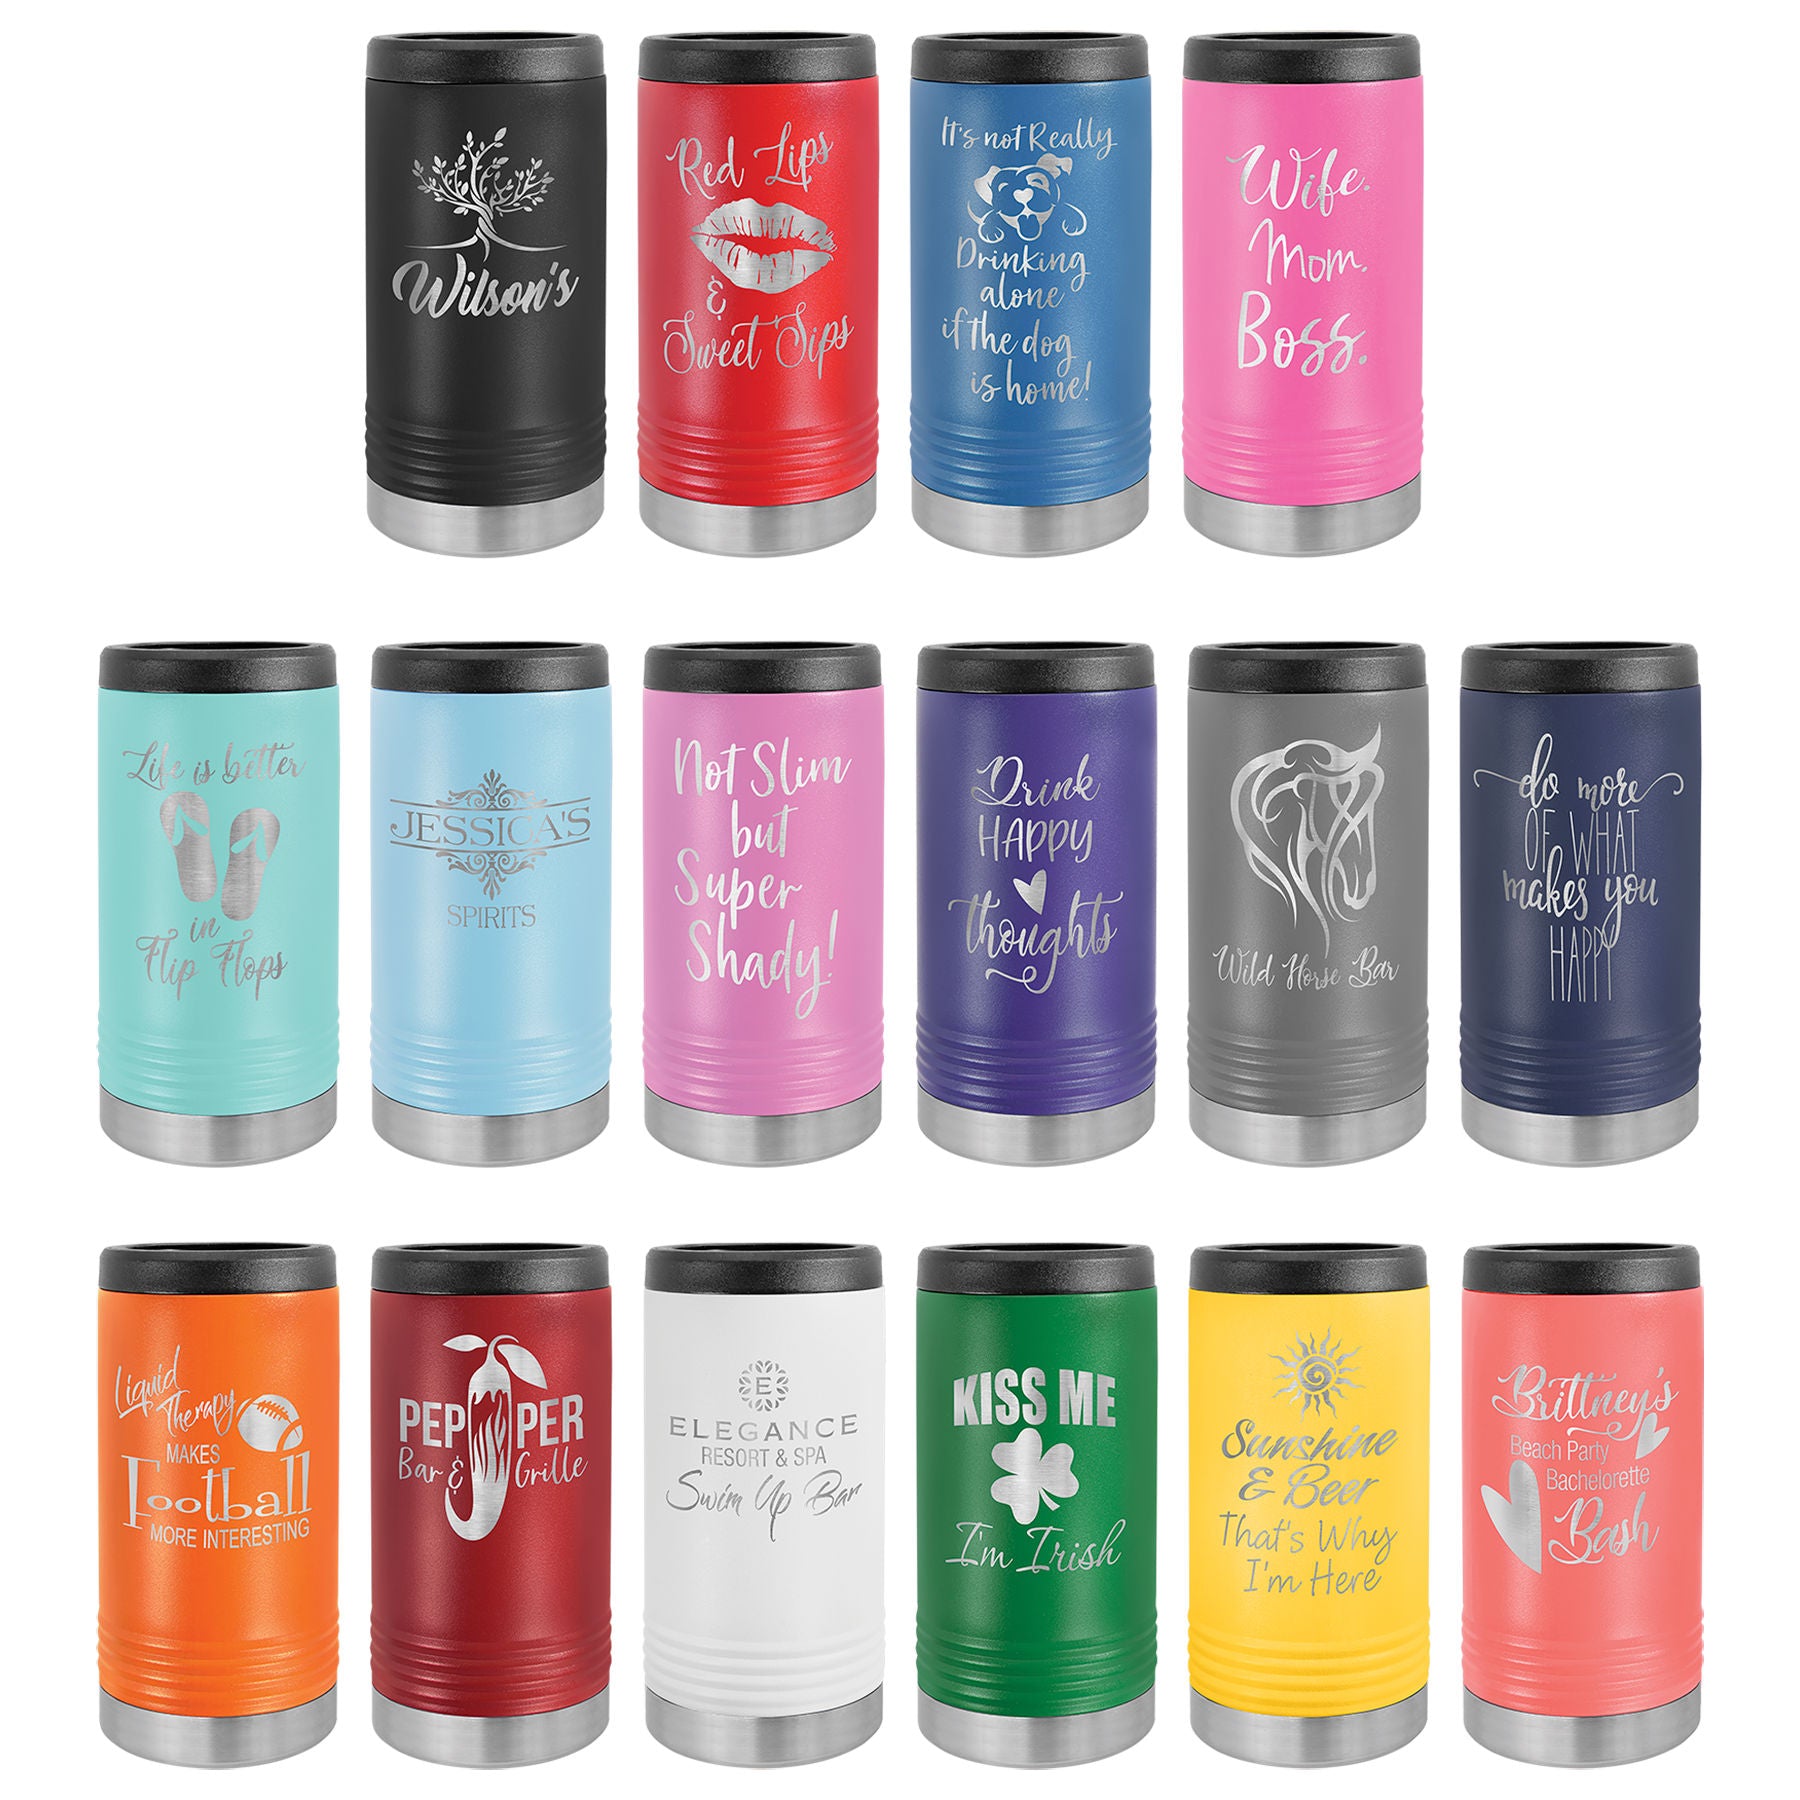 (12) Insulated Beverage Holders (Slim Size)